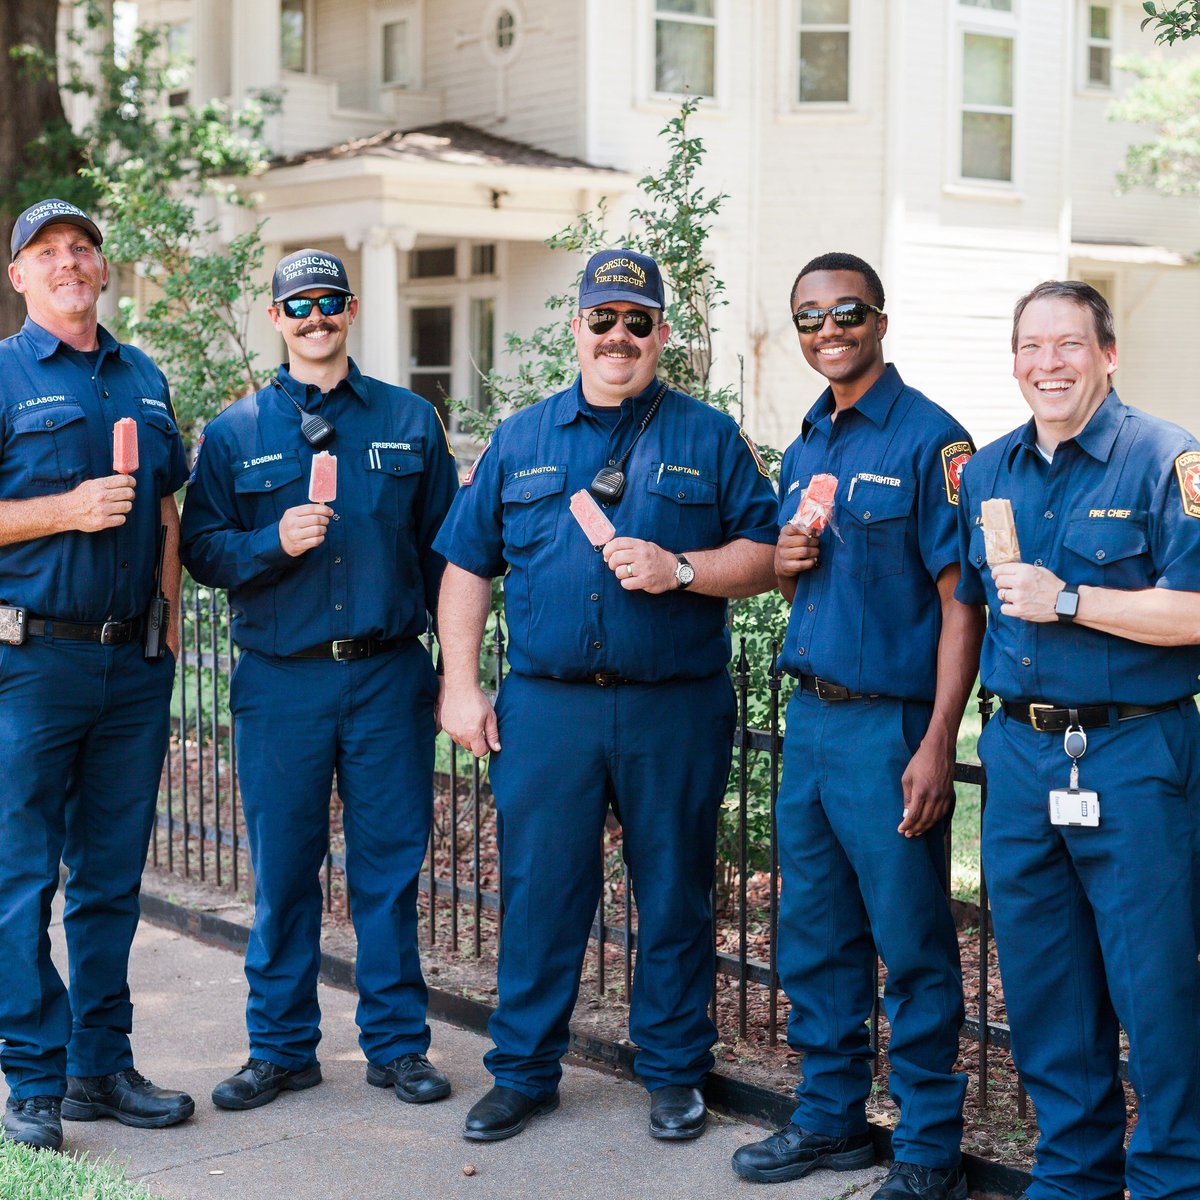 Firefighters eating popscicles at Corsicana Porchfest event